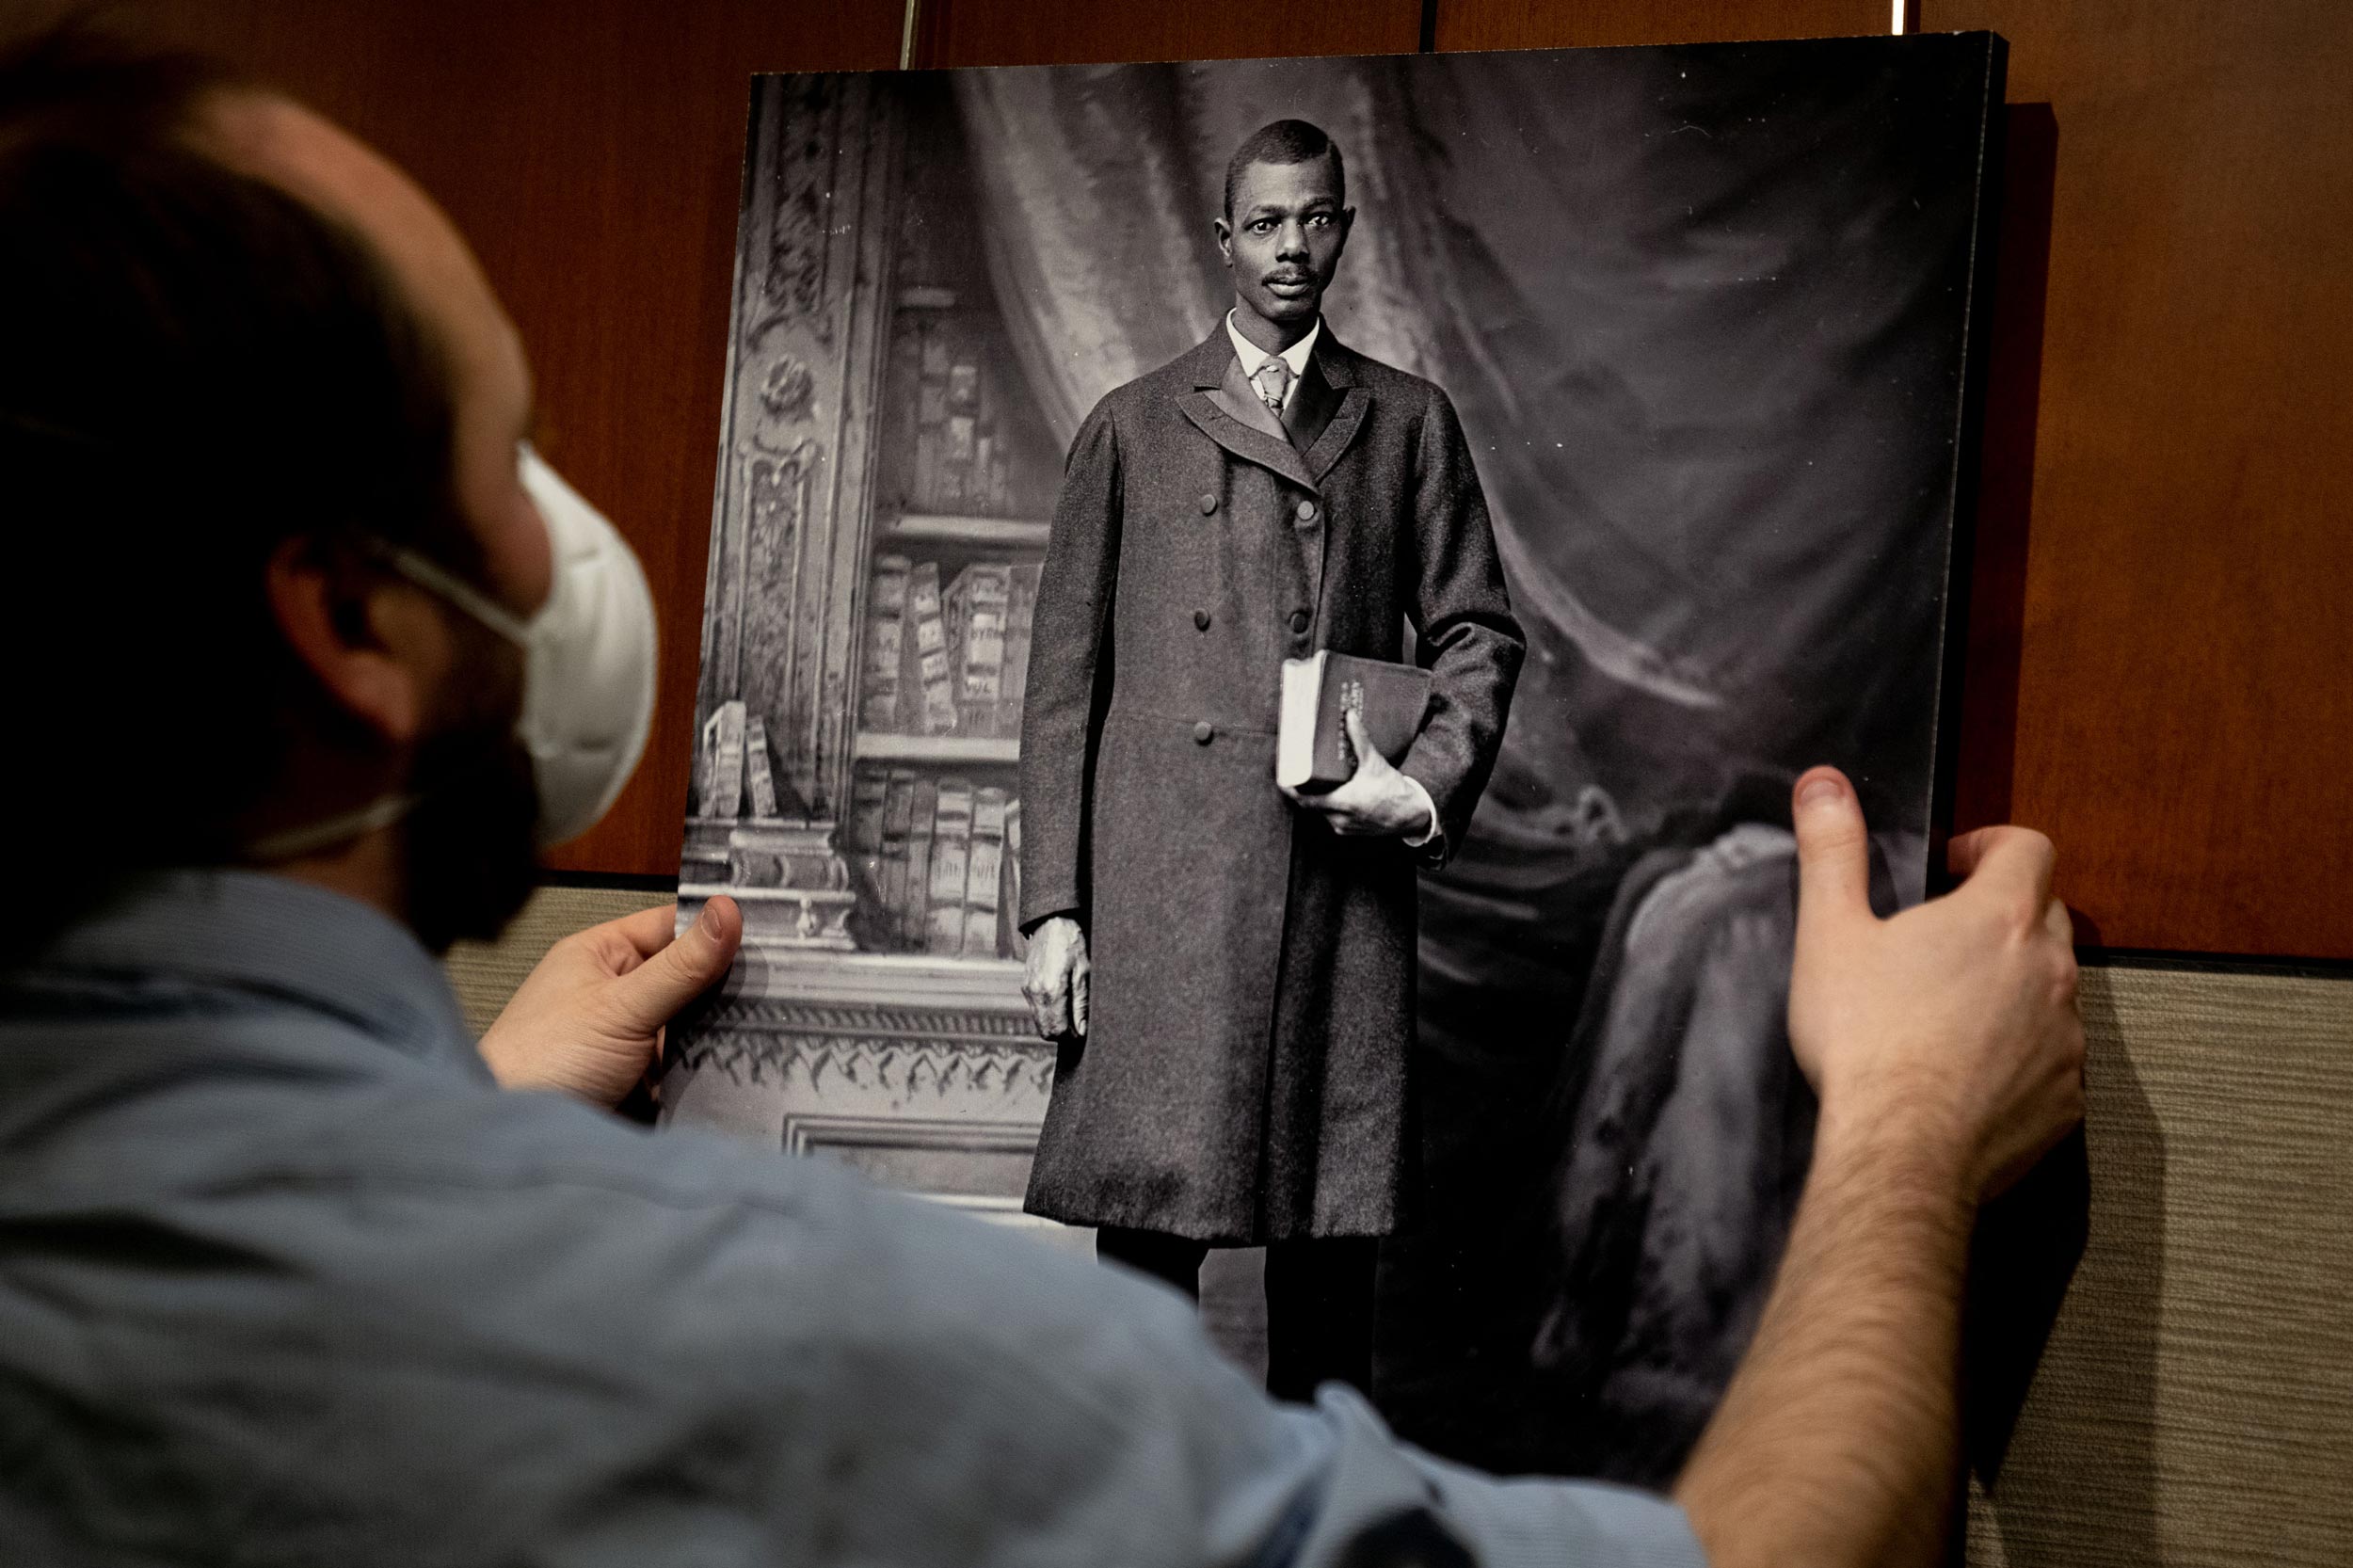 Northside librarian Evan Stankovics holds a black and white portrait of a Black man in a double-breasted coat, holding a book